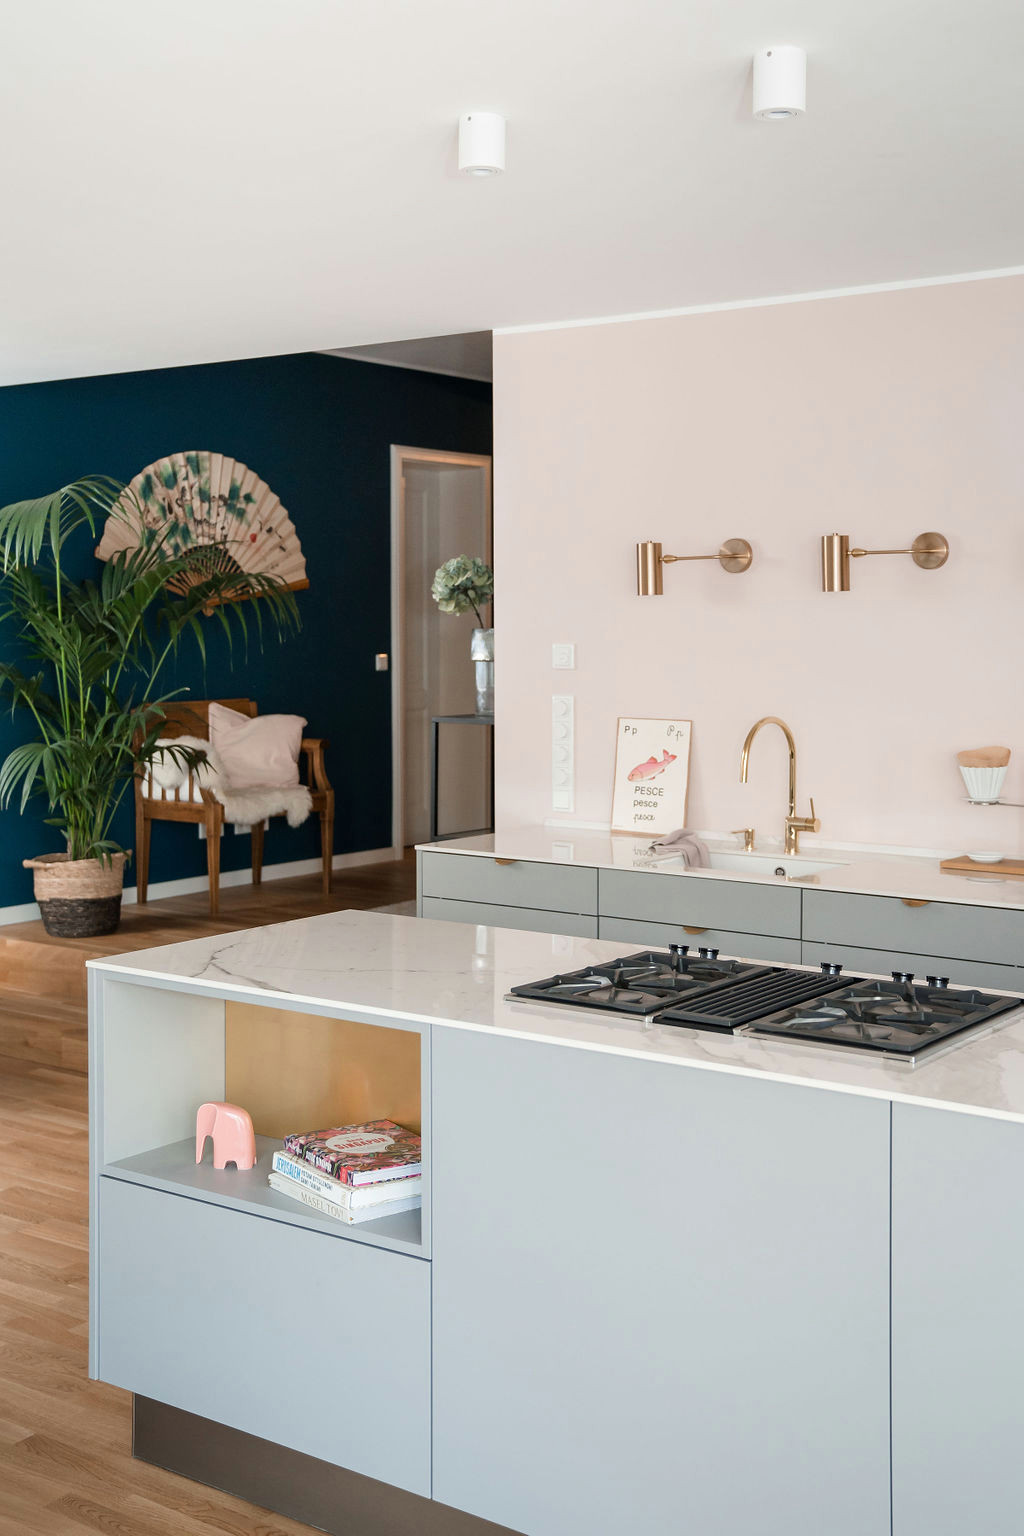 75 Kitchen with Gray Cabinets and Pink Backsplash Ideas You'll Love -  April, 2022 | Houzz